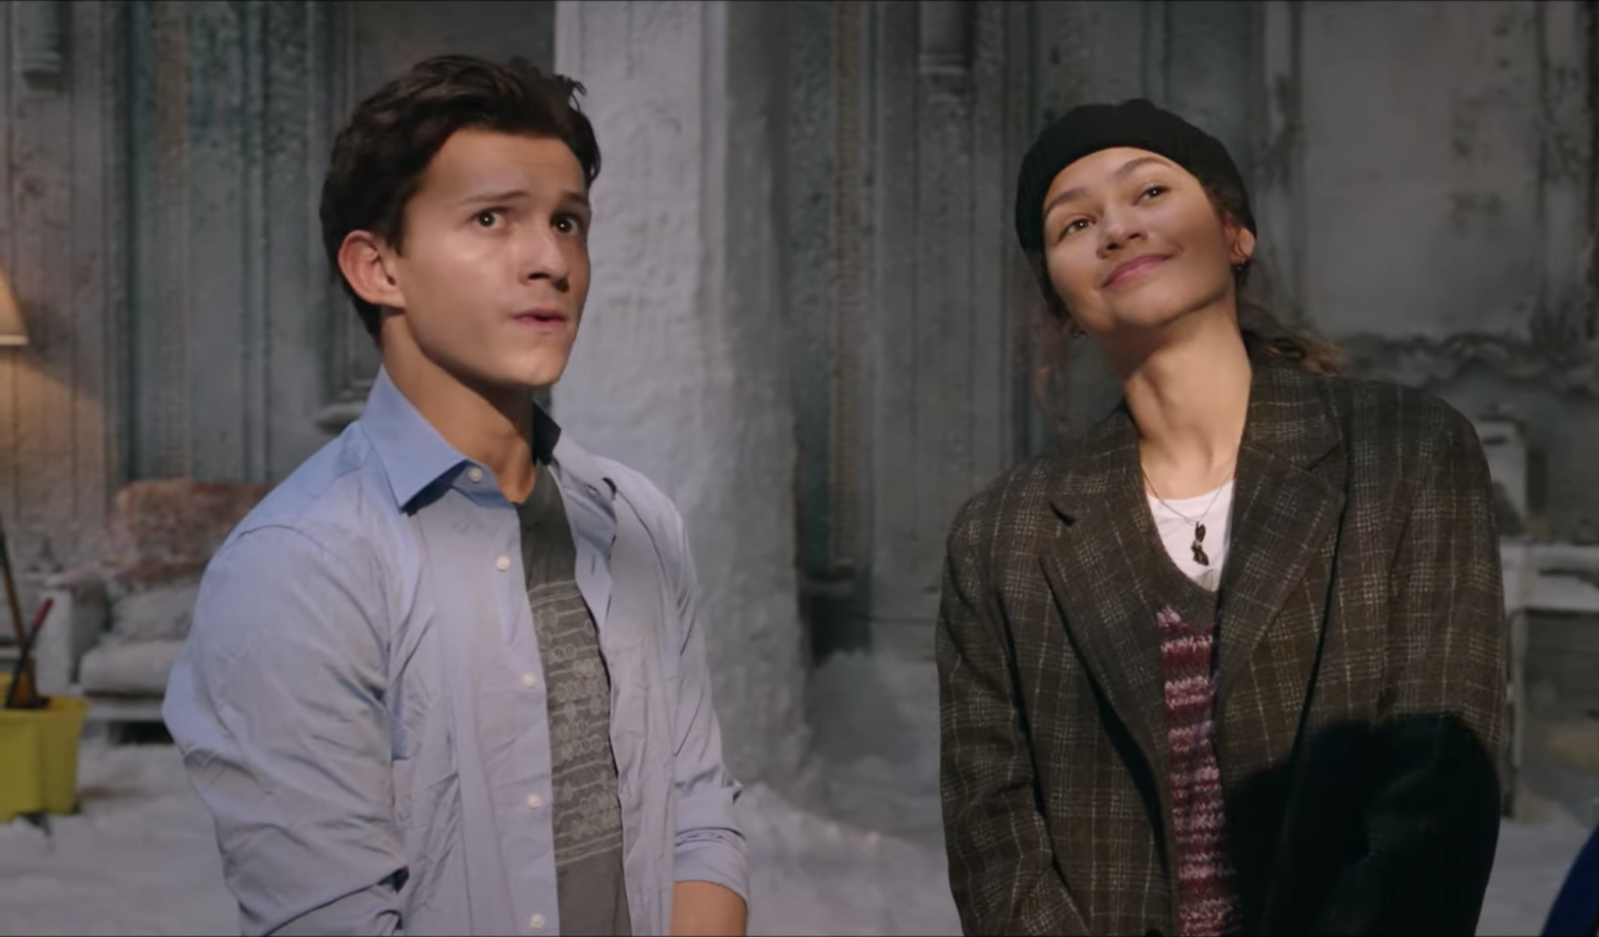 Spider-Man: No Way Home Trailer shows Peter and MJ